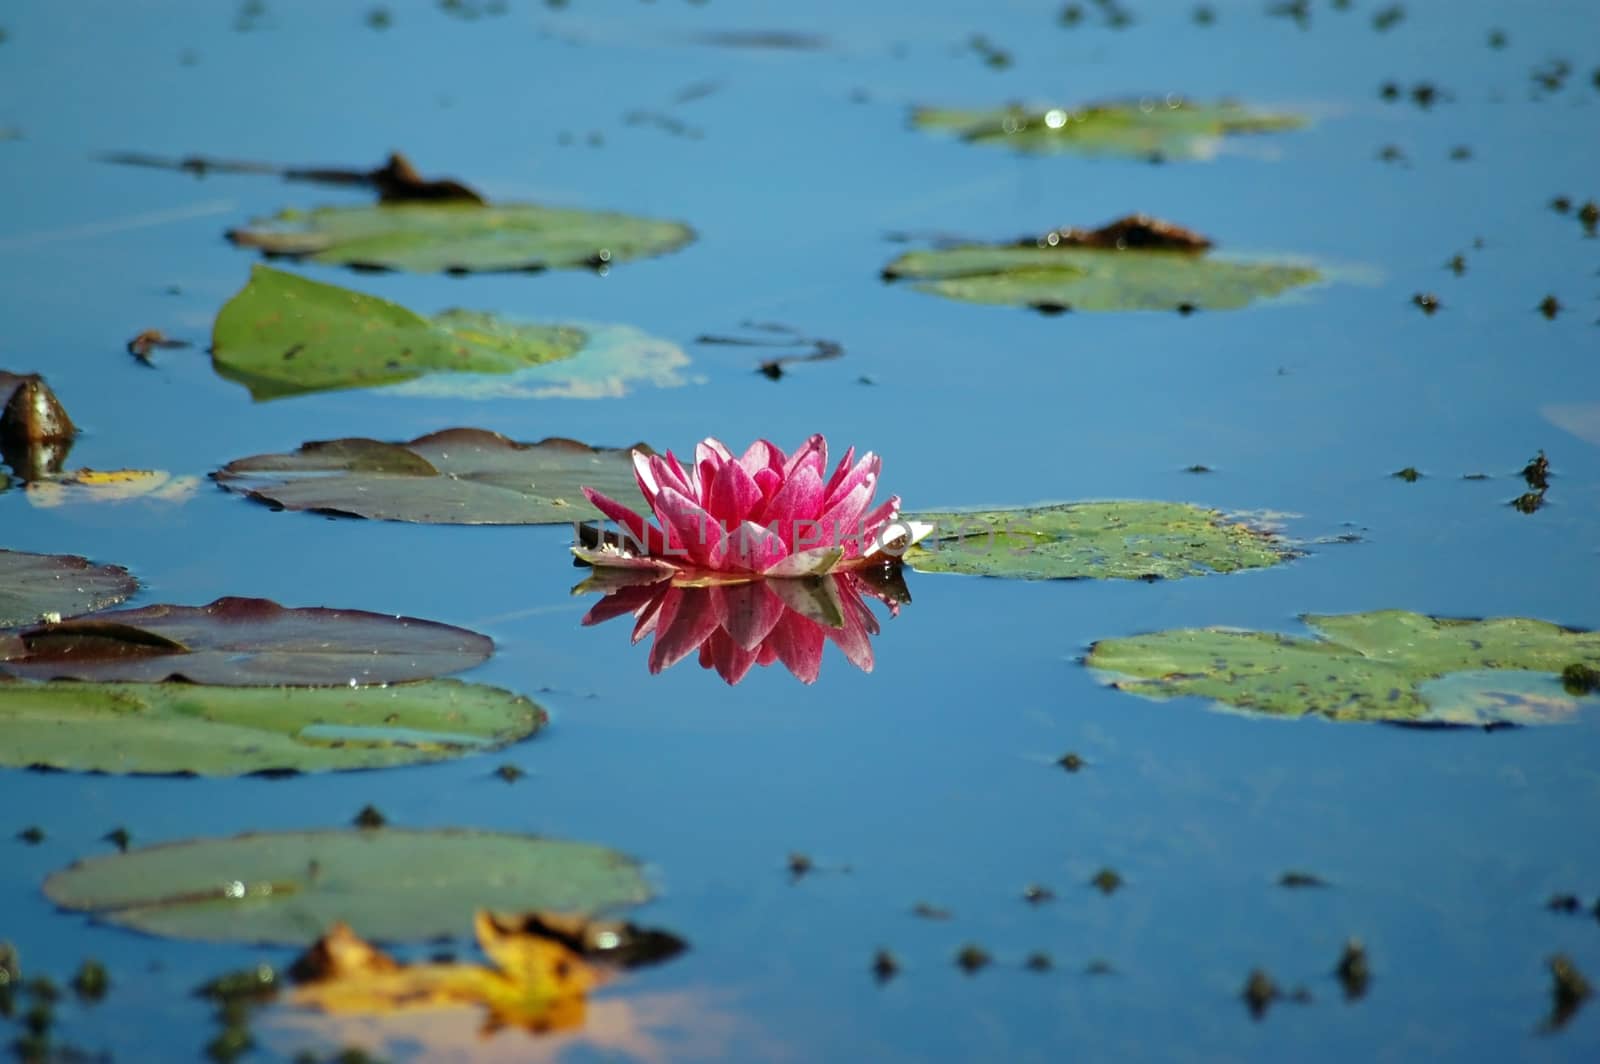 A blossoming pink lotus flower on a waterlilly pond in late afternoon sunshine.